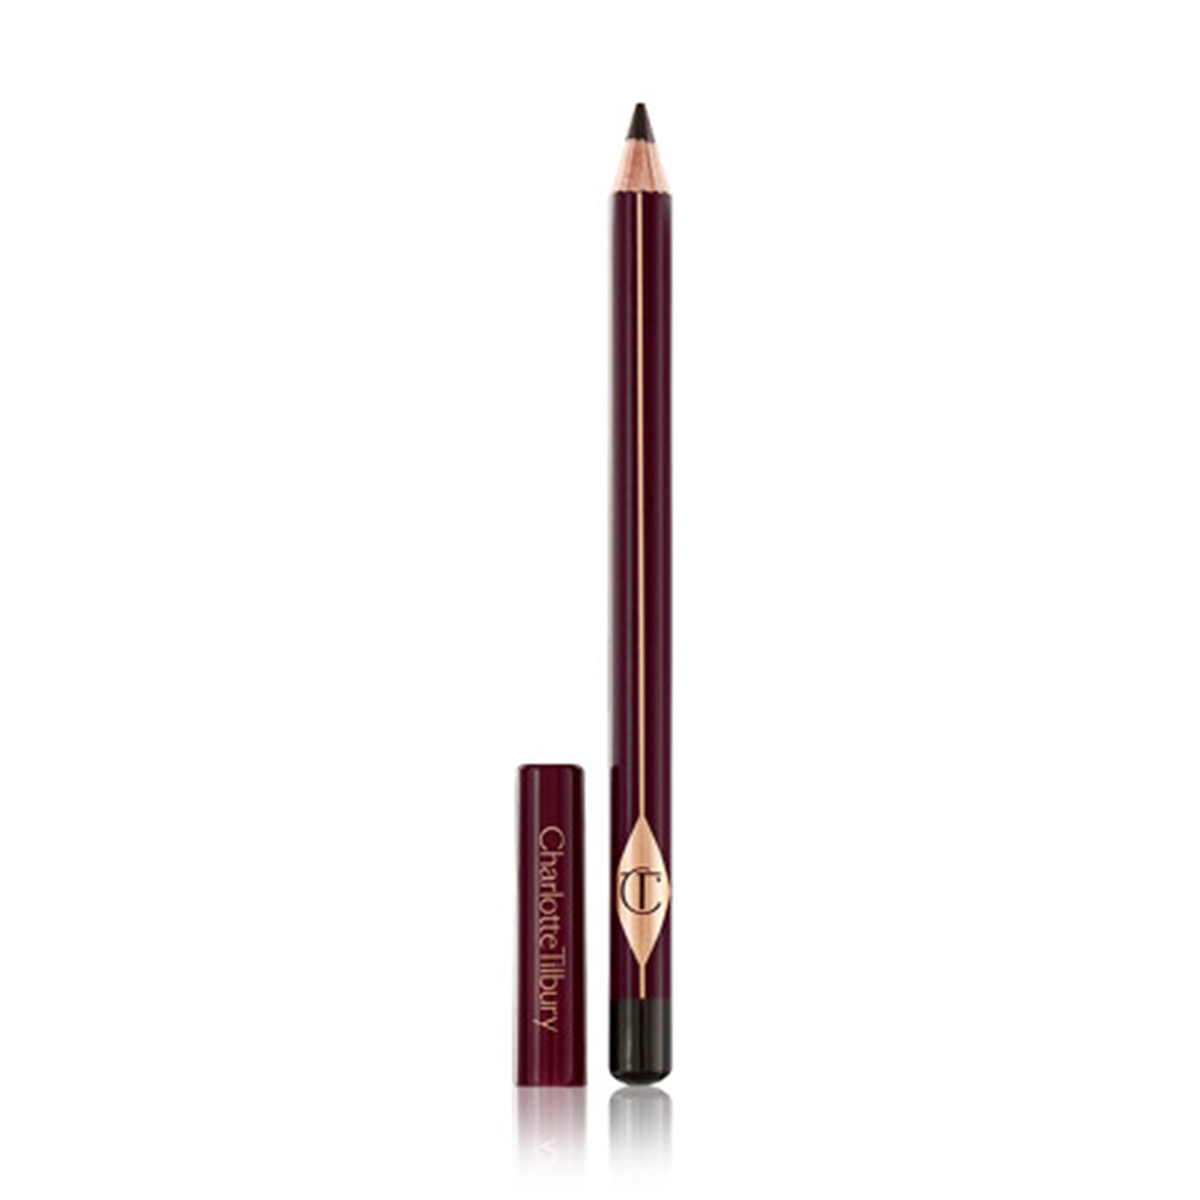 Charlotte Tilbury The Classic in Classic Brown